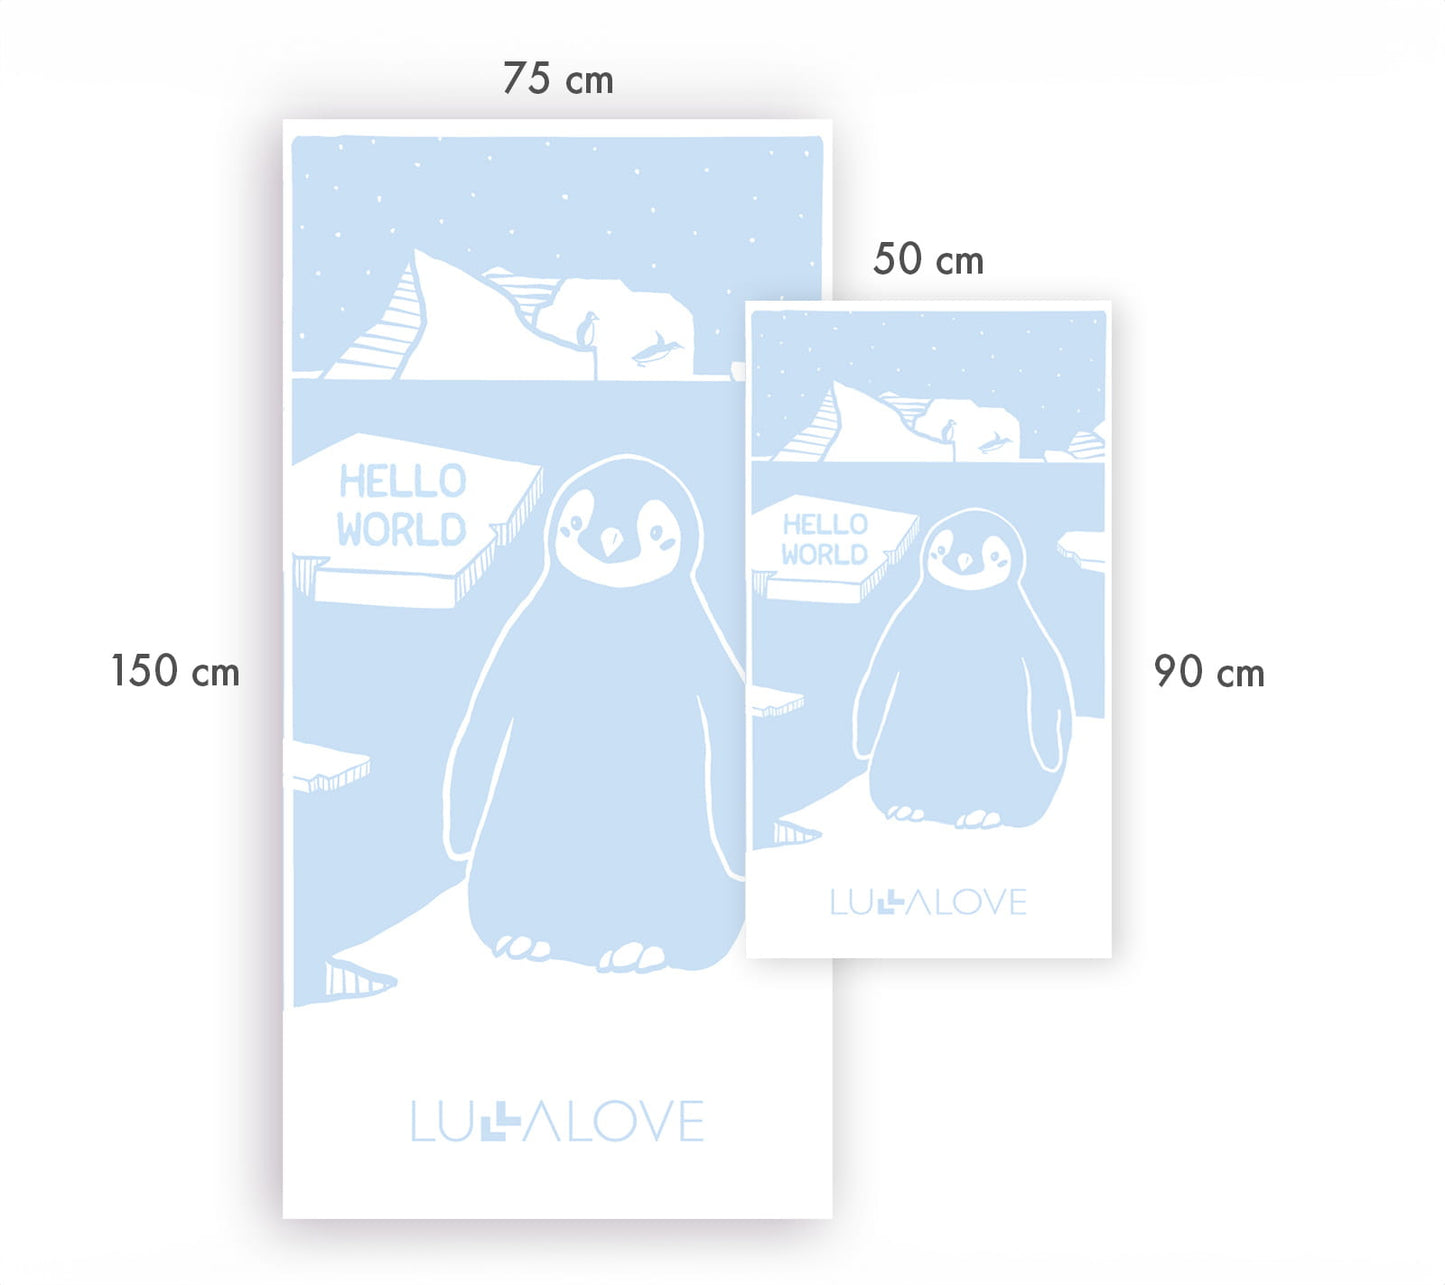 Light & Quick-drying Bamboo Towel - Penguin (2 sizes)